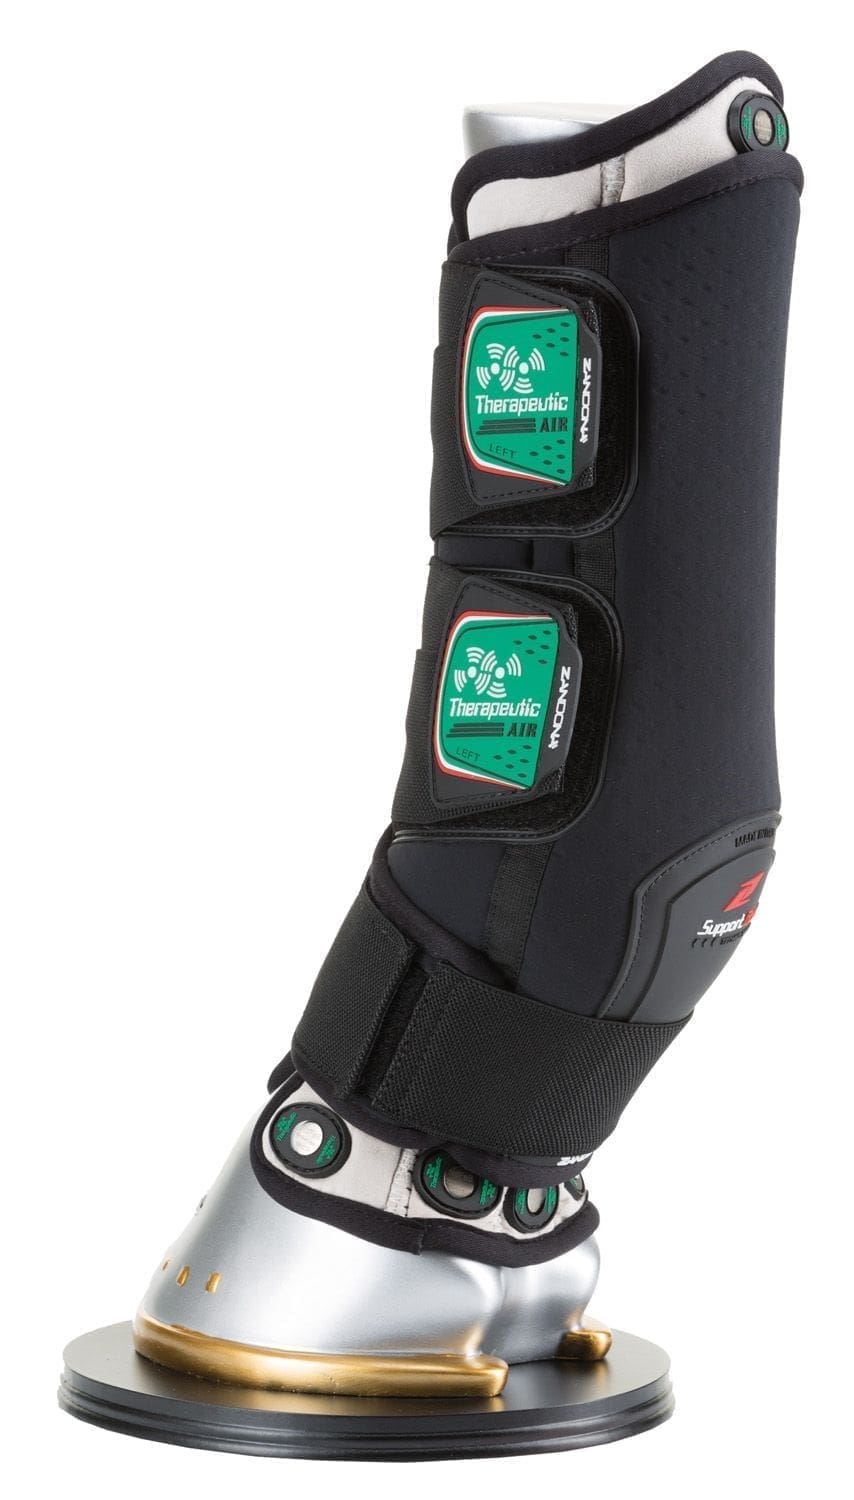 Se Zandona Therapeutic Support Boot Air forben Large+ (33-35cm) hos Dansk Rideudstyr